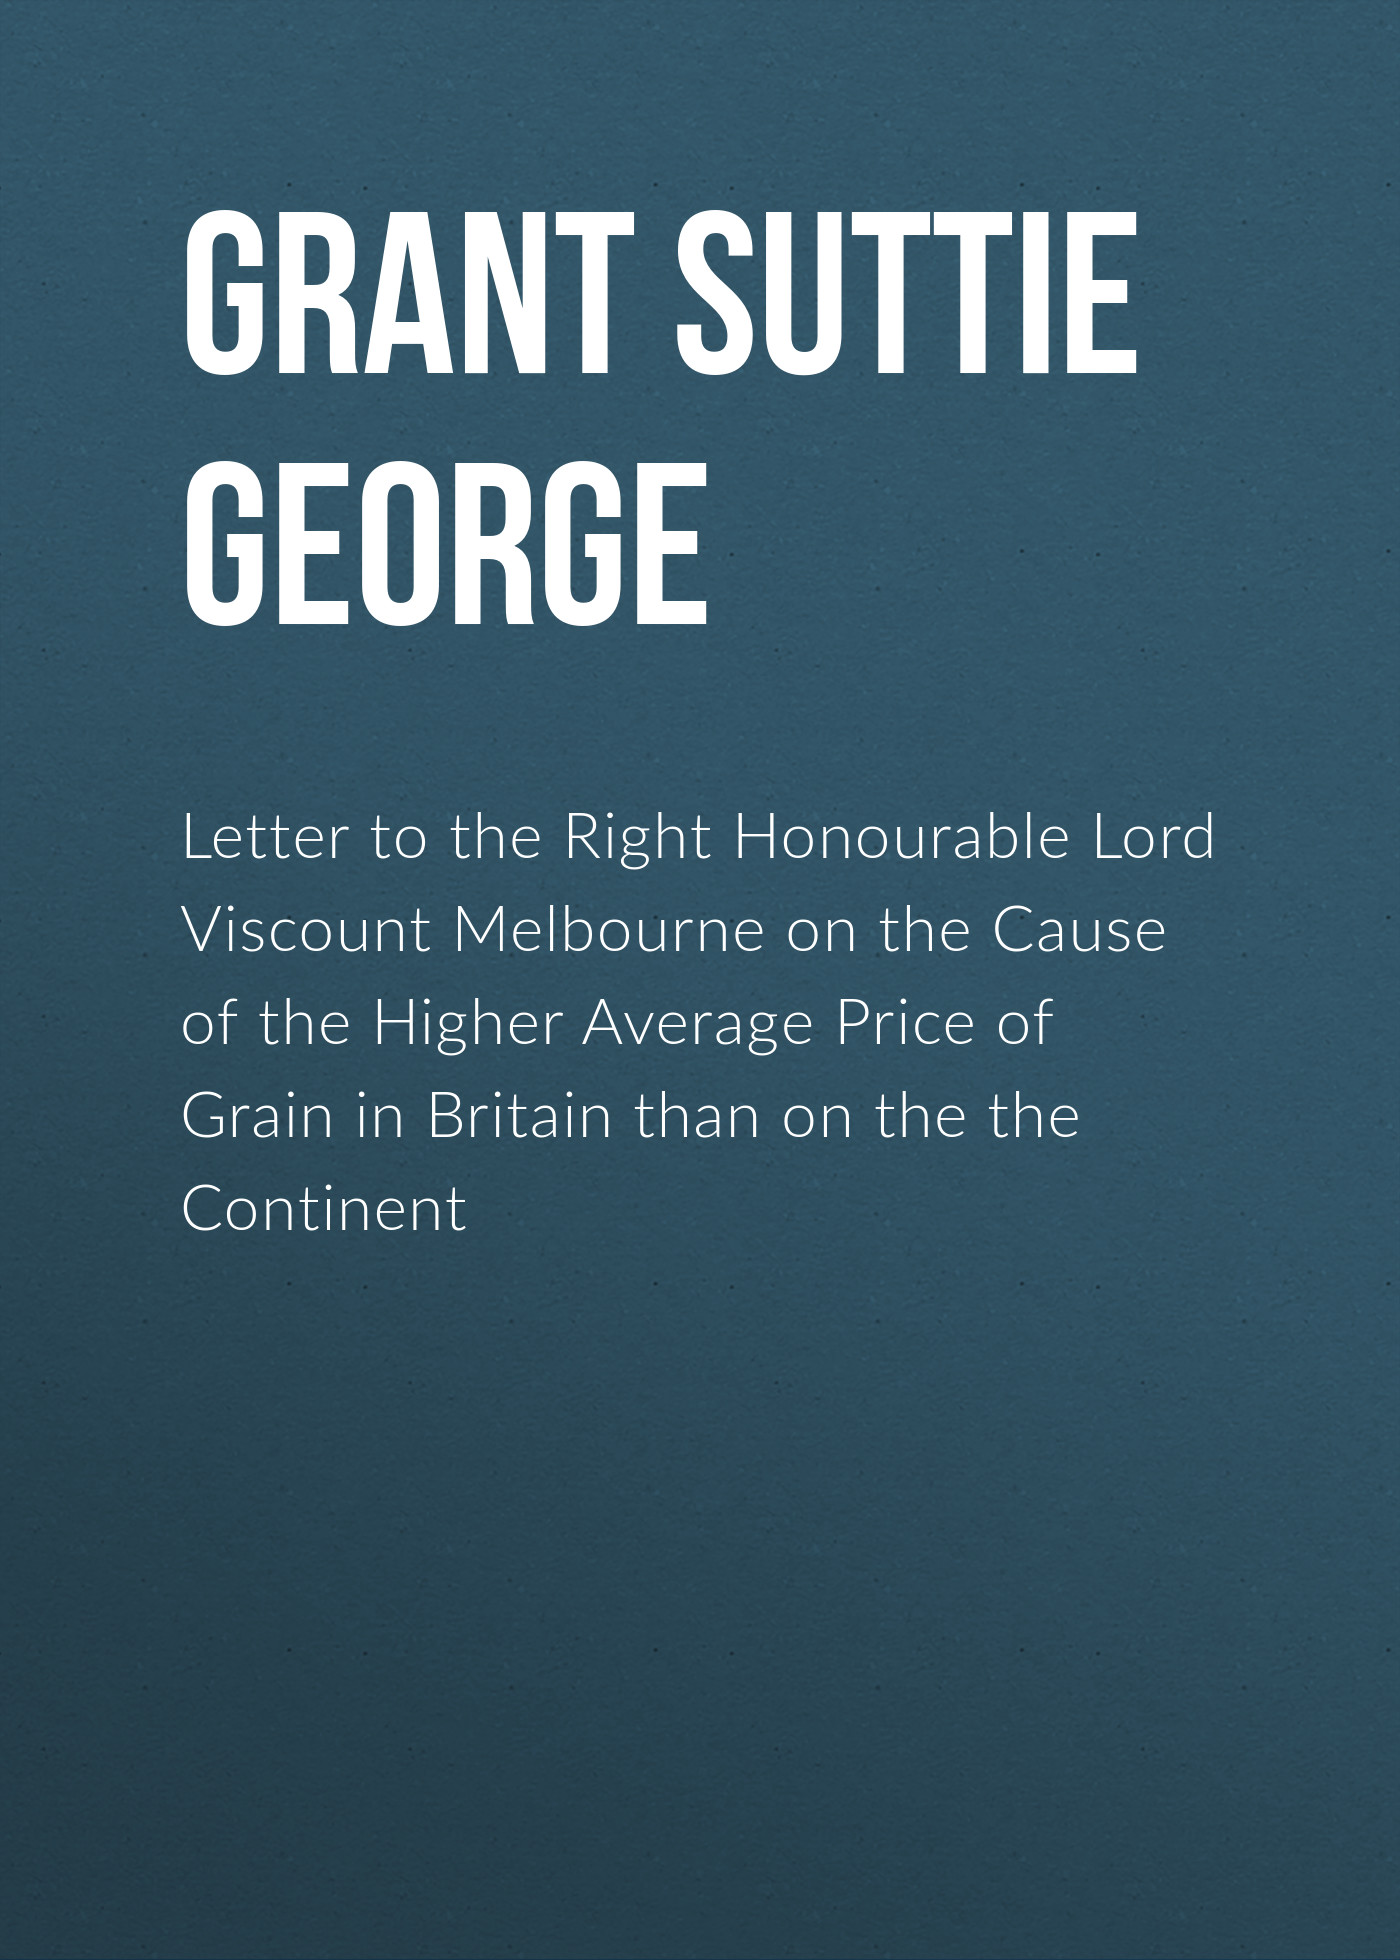 Letter to the Right Honourable Lord Viscount Melbourne on the Cause of the Higher Average Price of Grain in Britain than on the the Continent